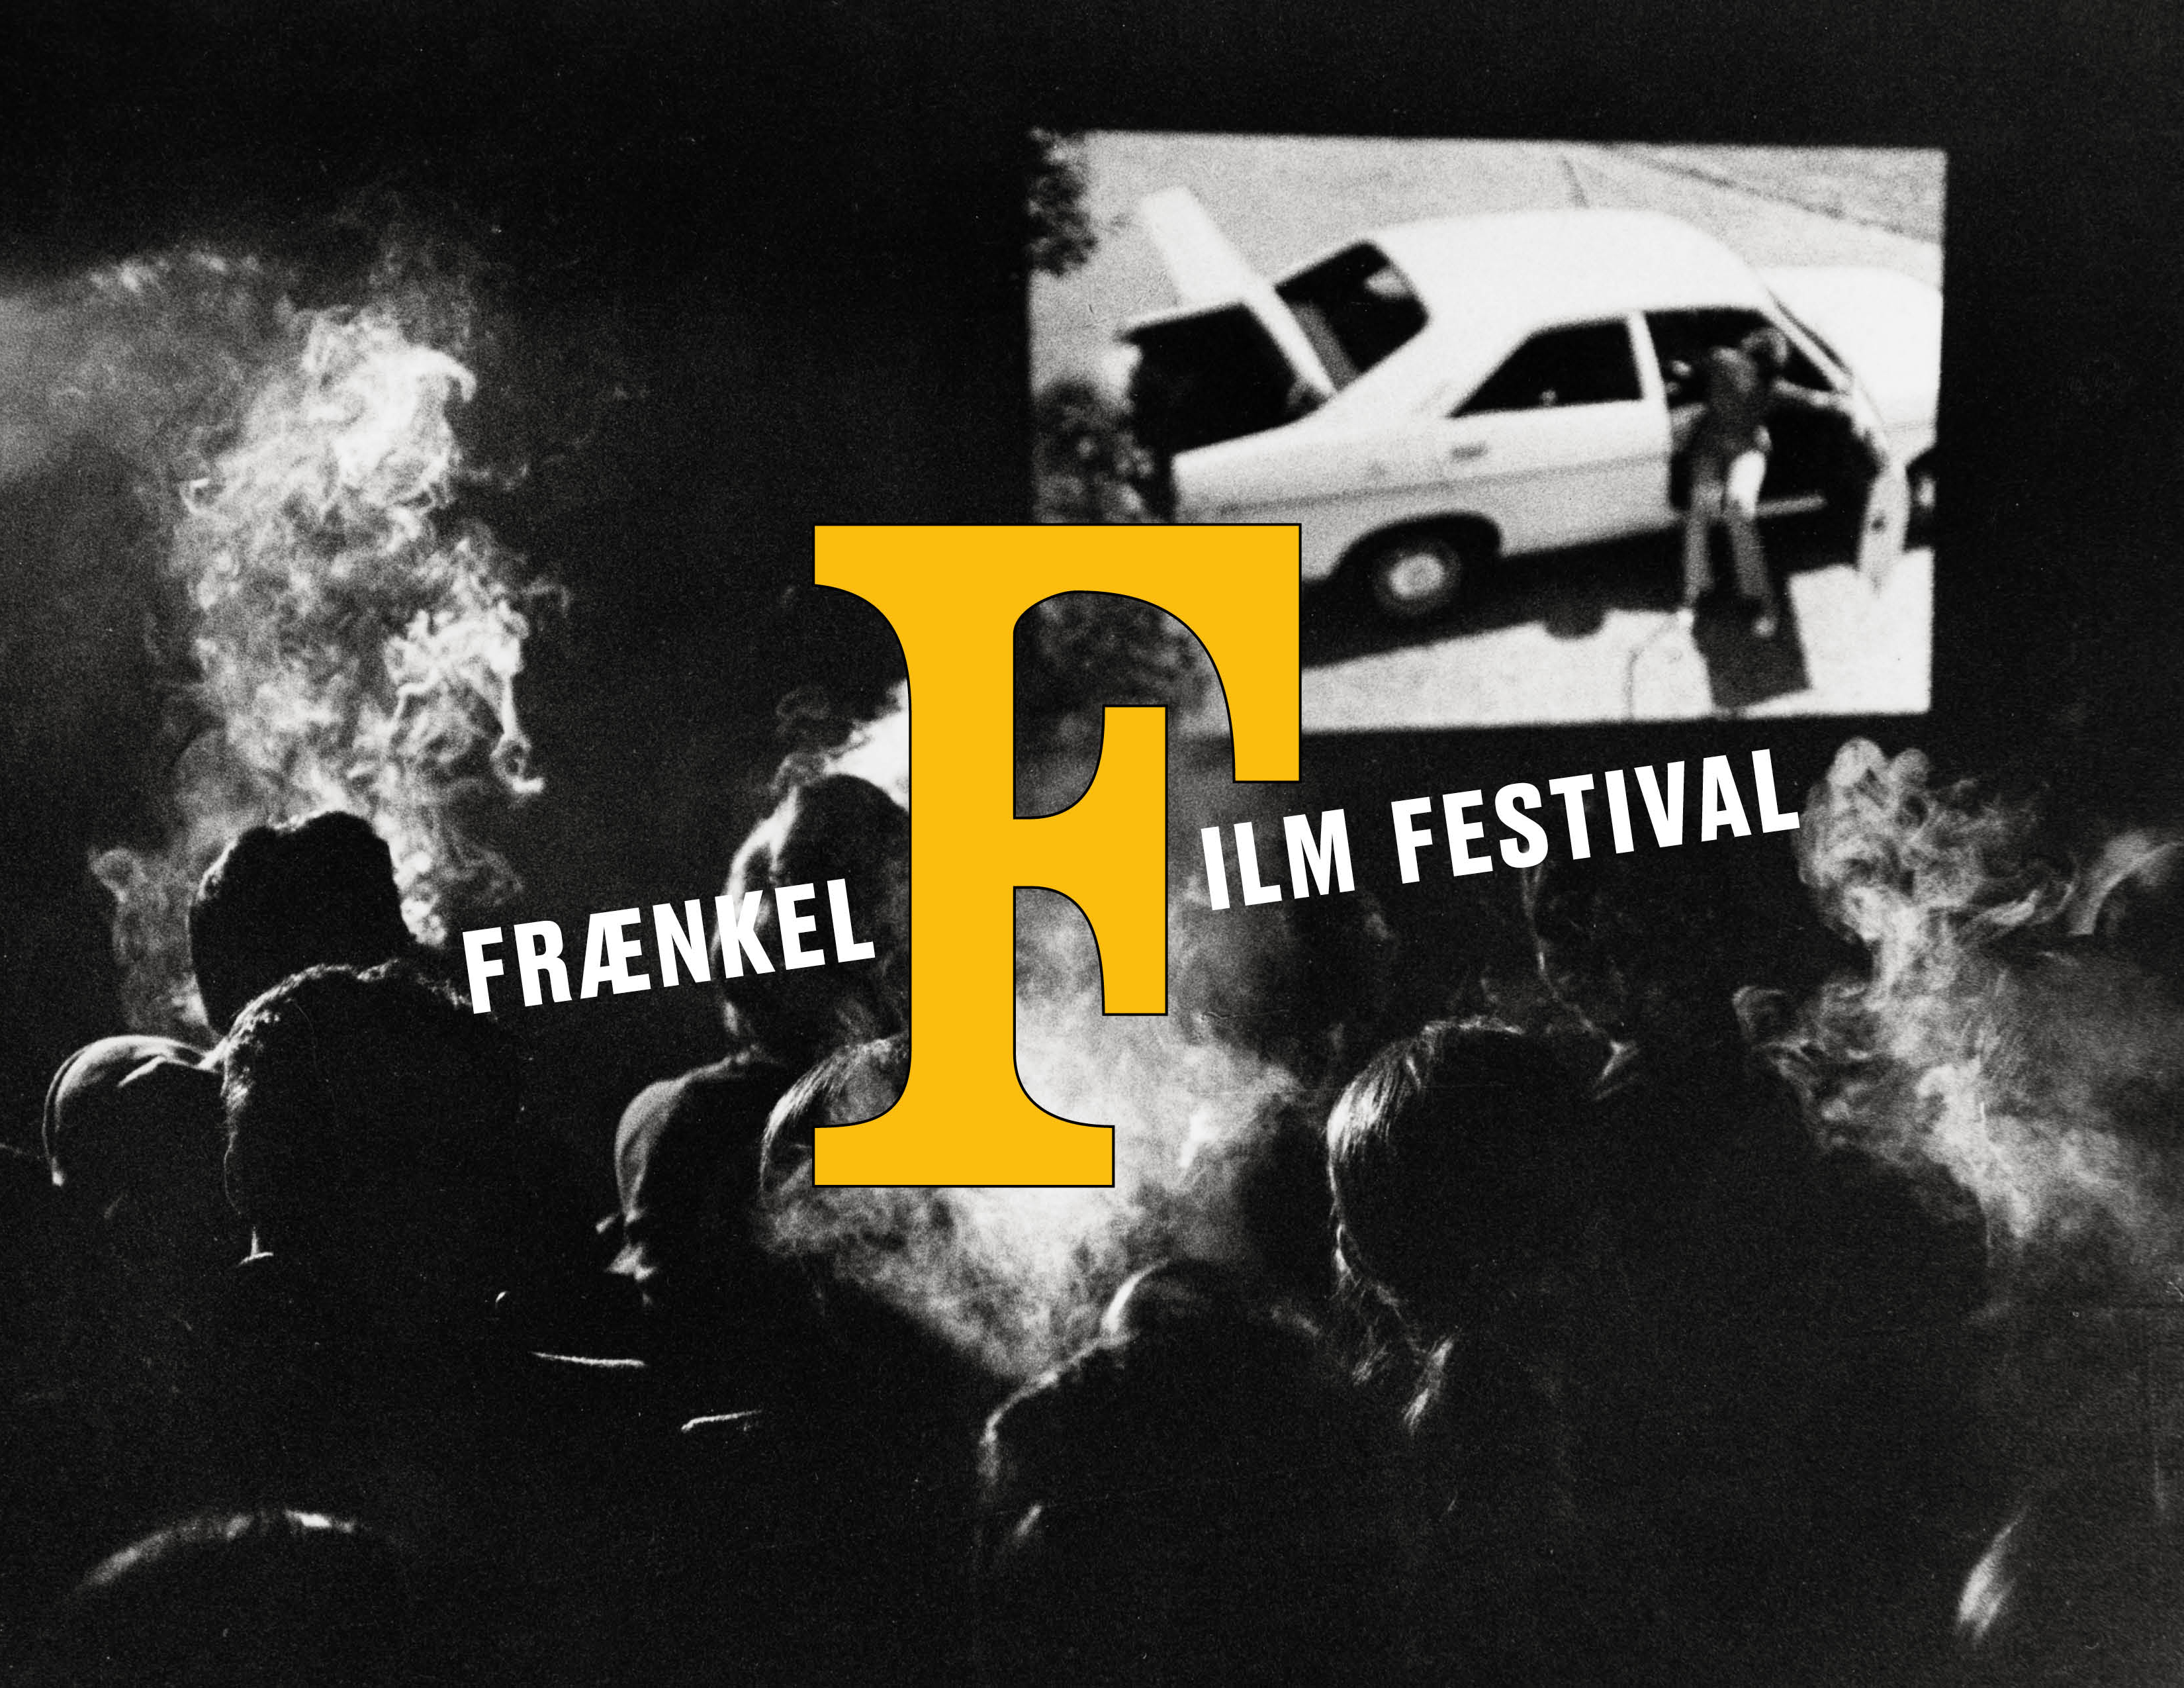 Black and white image of audience members smoking in a theater with a logo overlayed